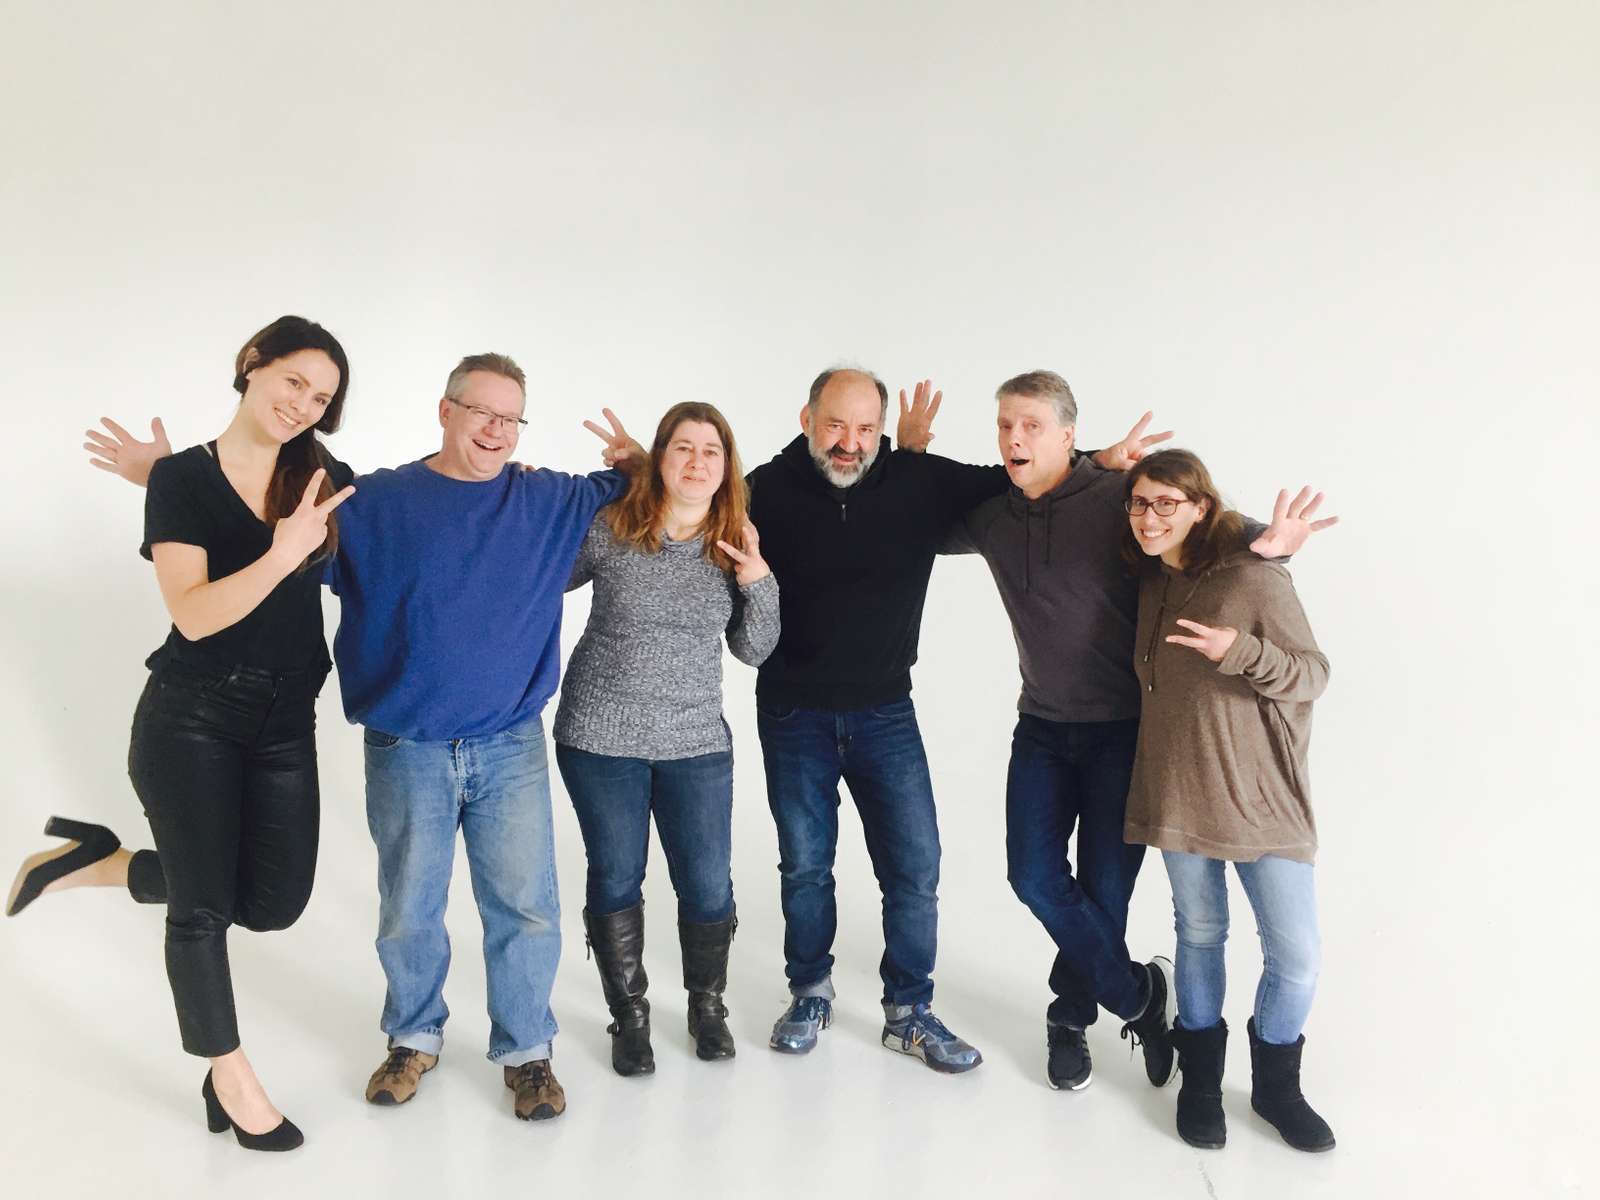 On our final day as Rodale employees, the Photo Ops team takes a photo. Naomi, Matt, Staci, Mitch, Troy and Nikki. Family. 